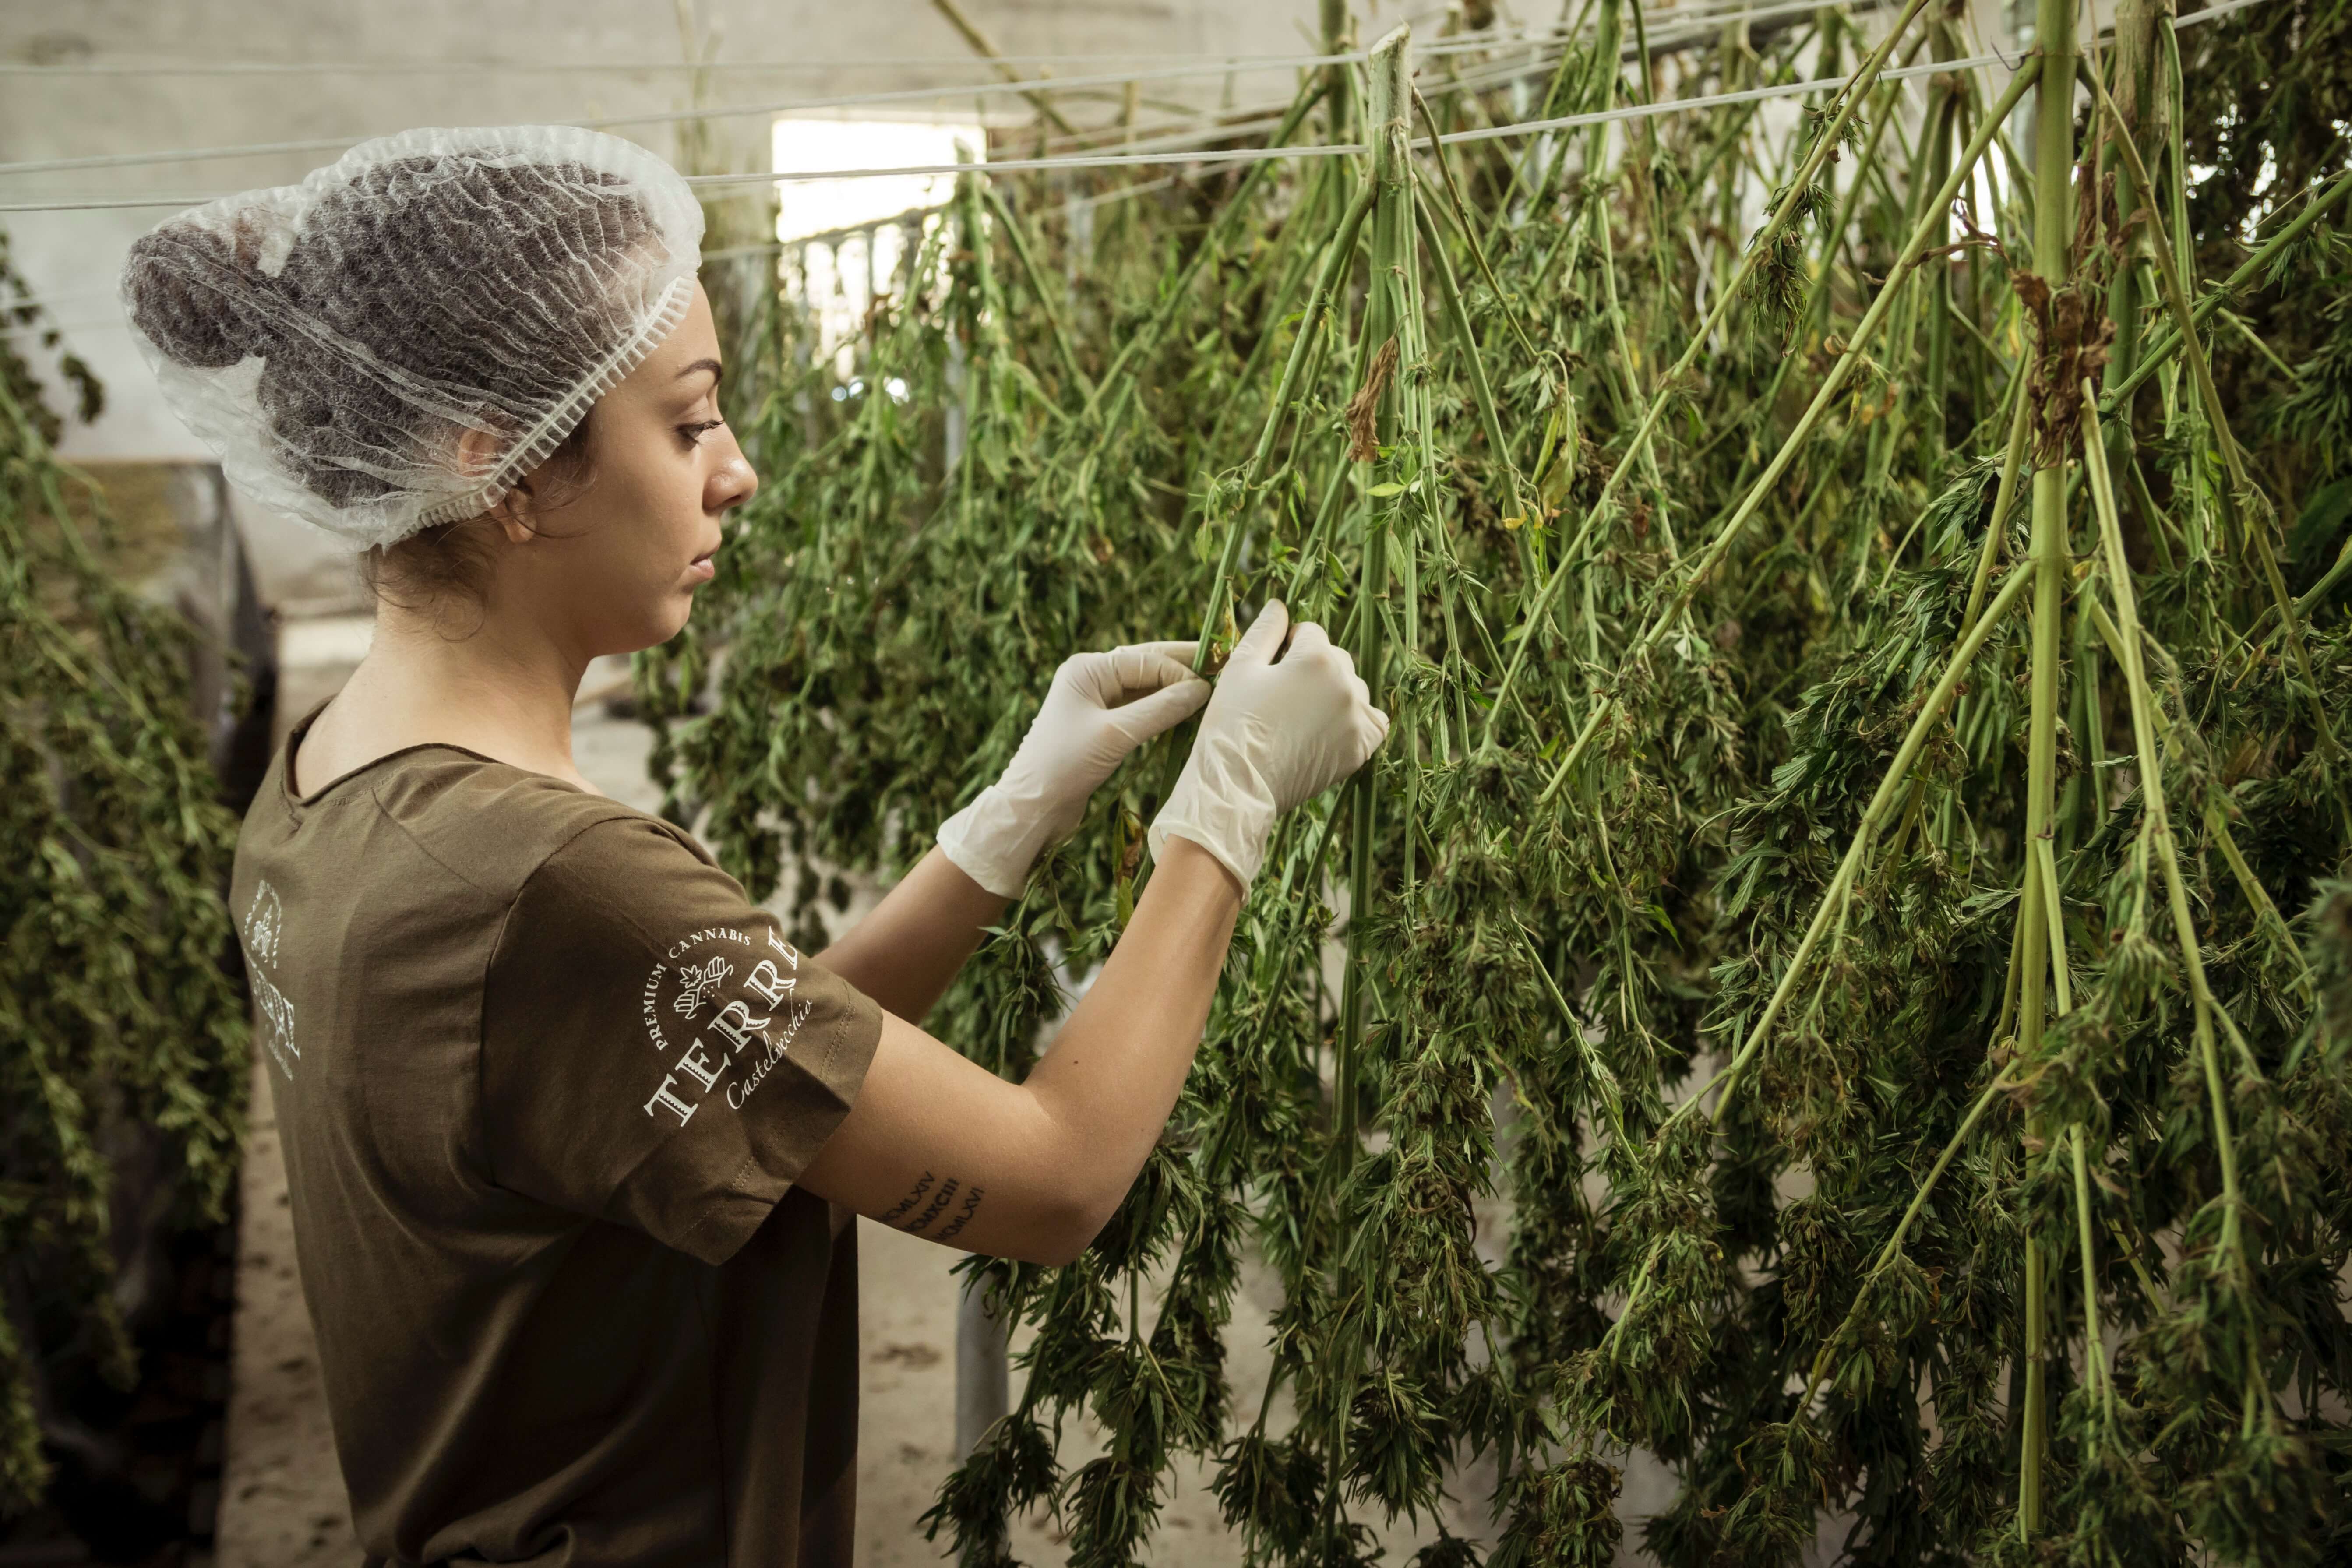 The Face of Cannabis - Who Works in the Cannabis Industry Today?